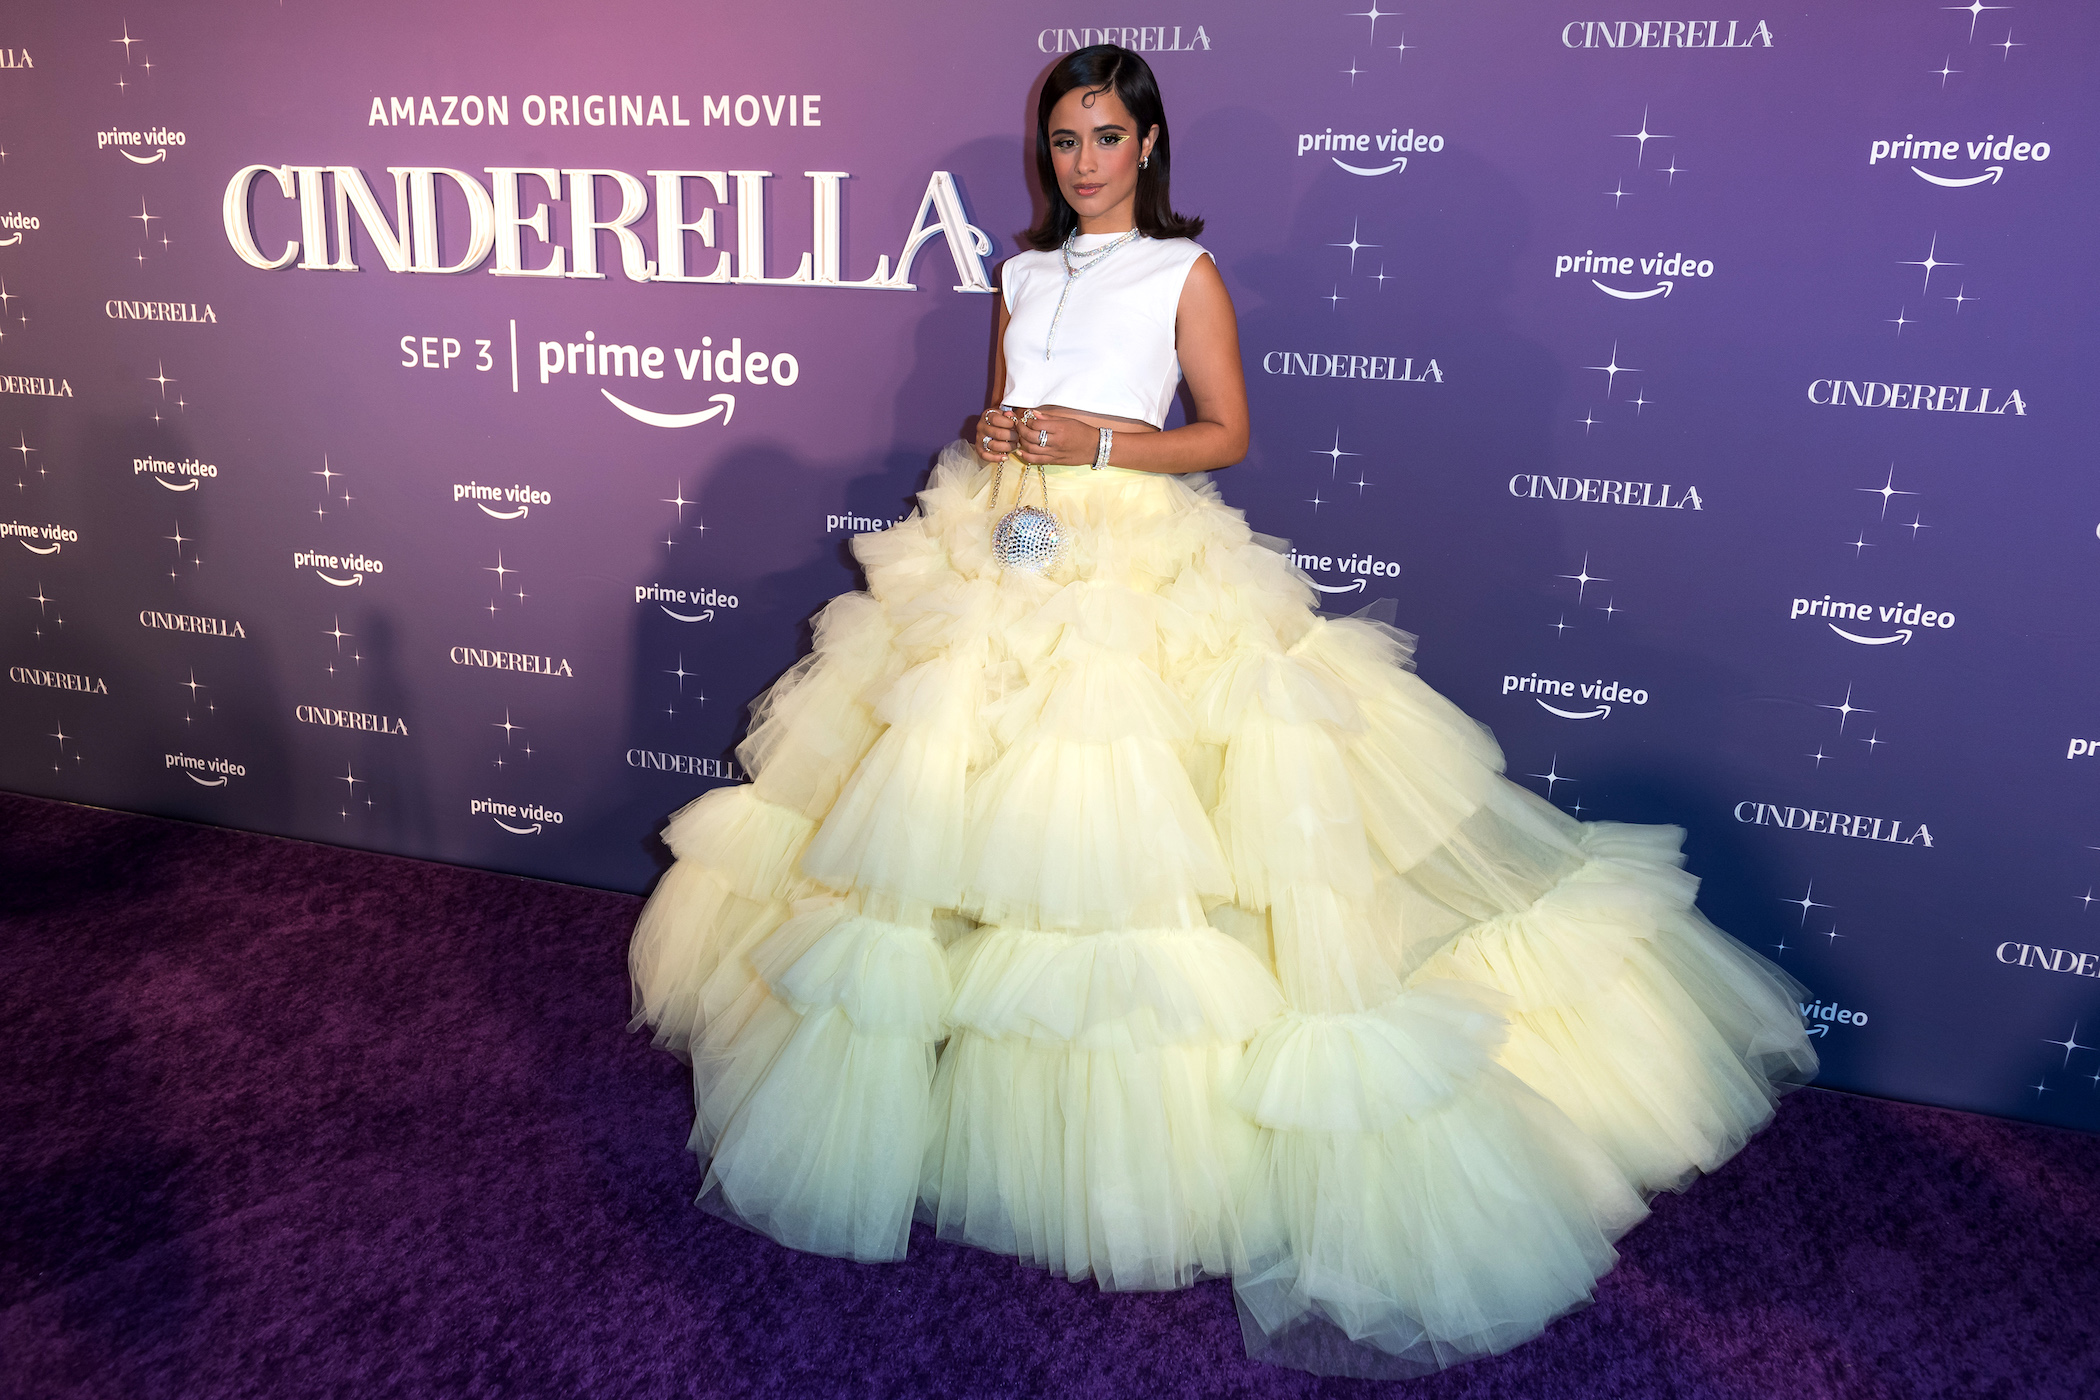 In one of her Cinderella dresses, Camila Cabello steps out in Miami at the Cinderella premiere